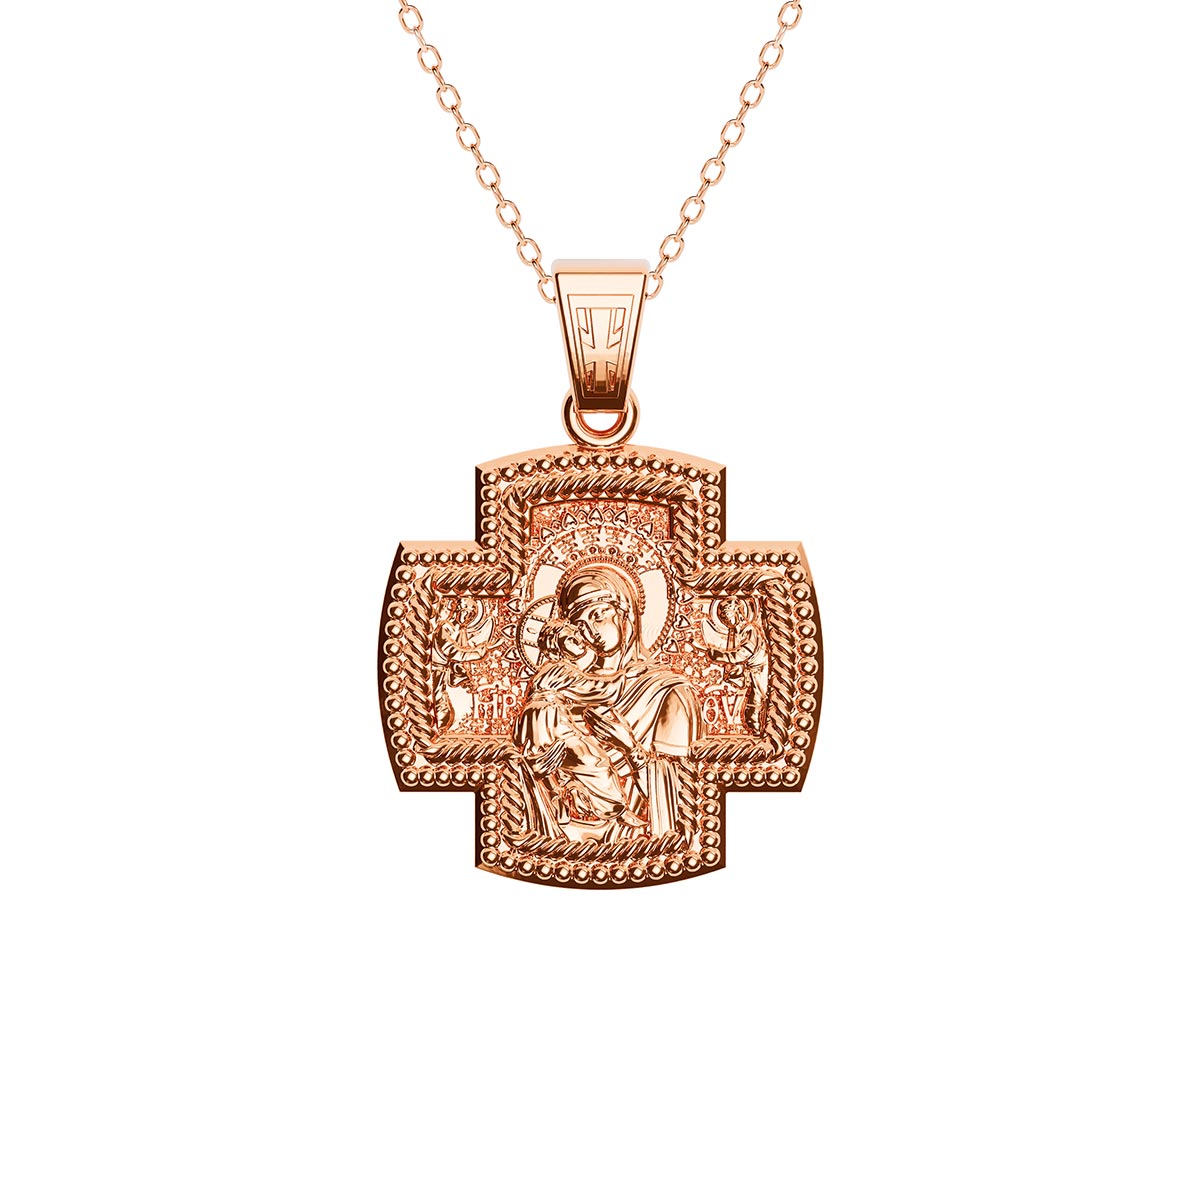 Virgin Mary & Jesus Two-Sided Sculpted Cross Necklace